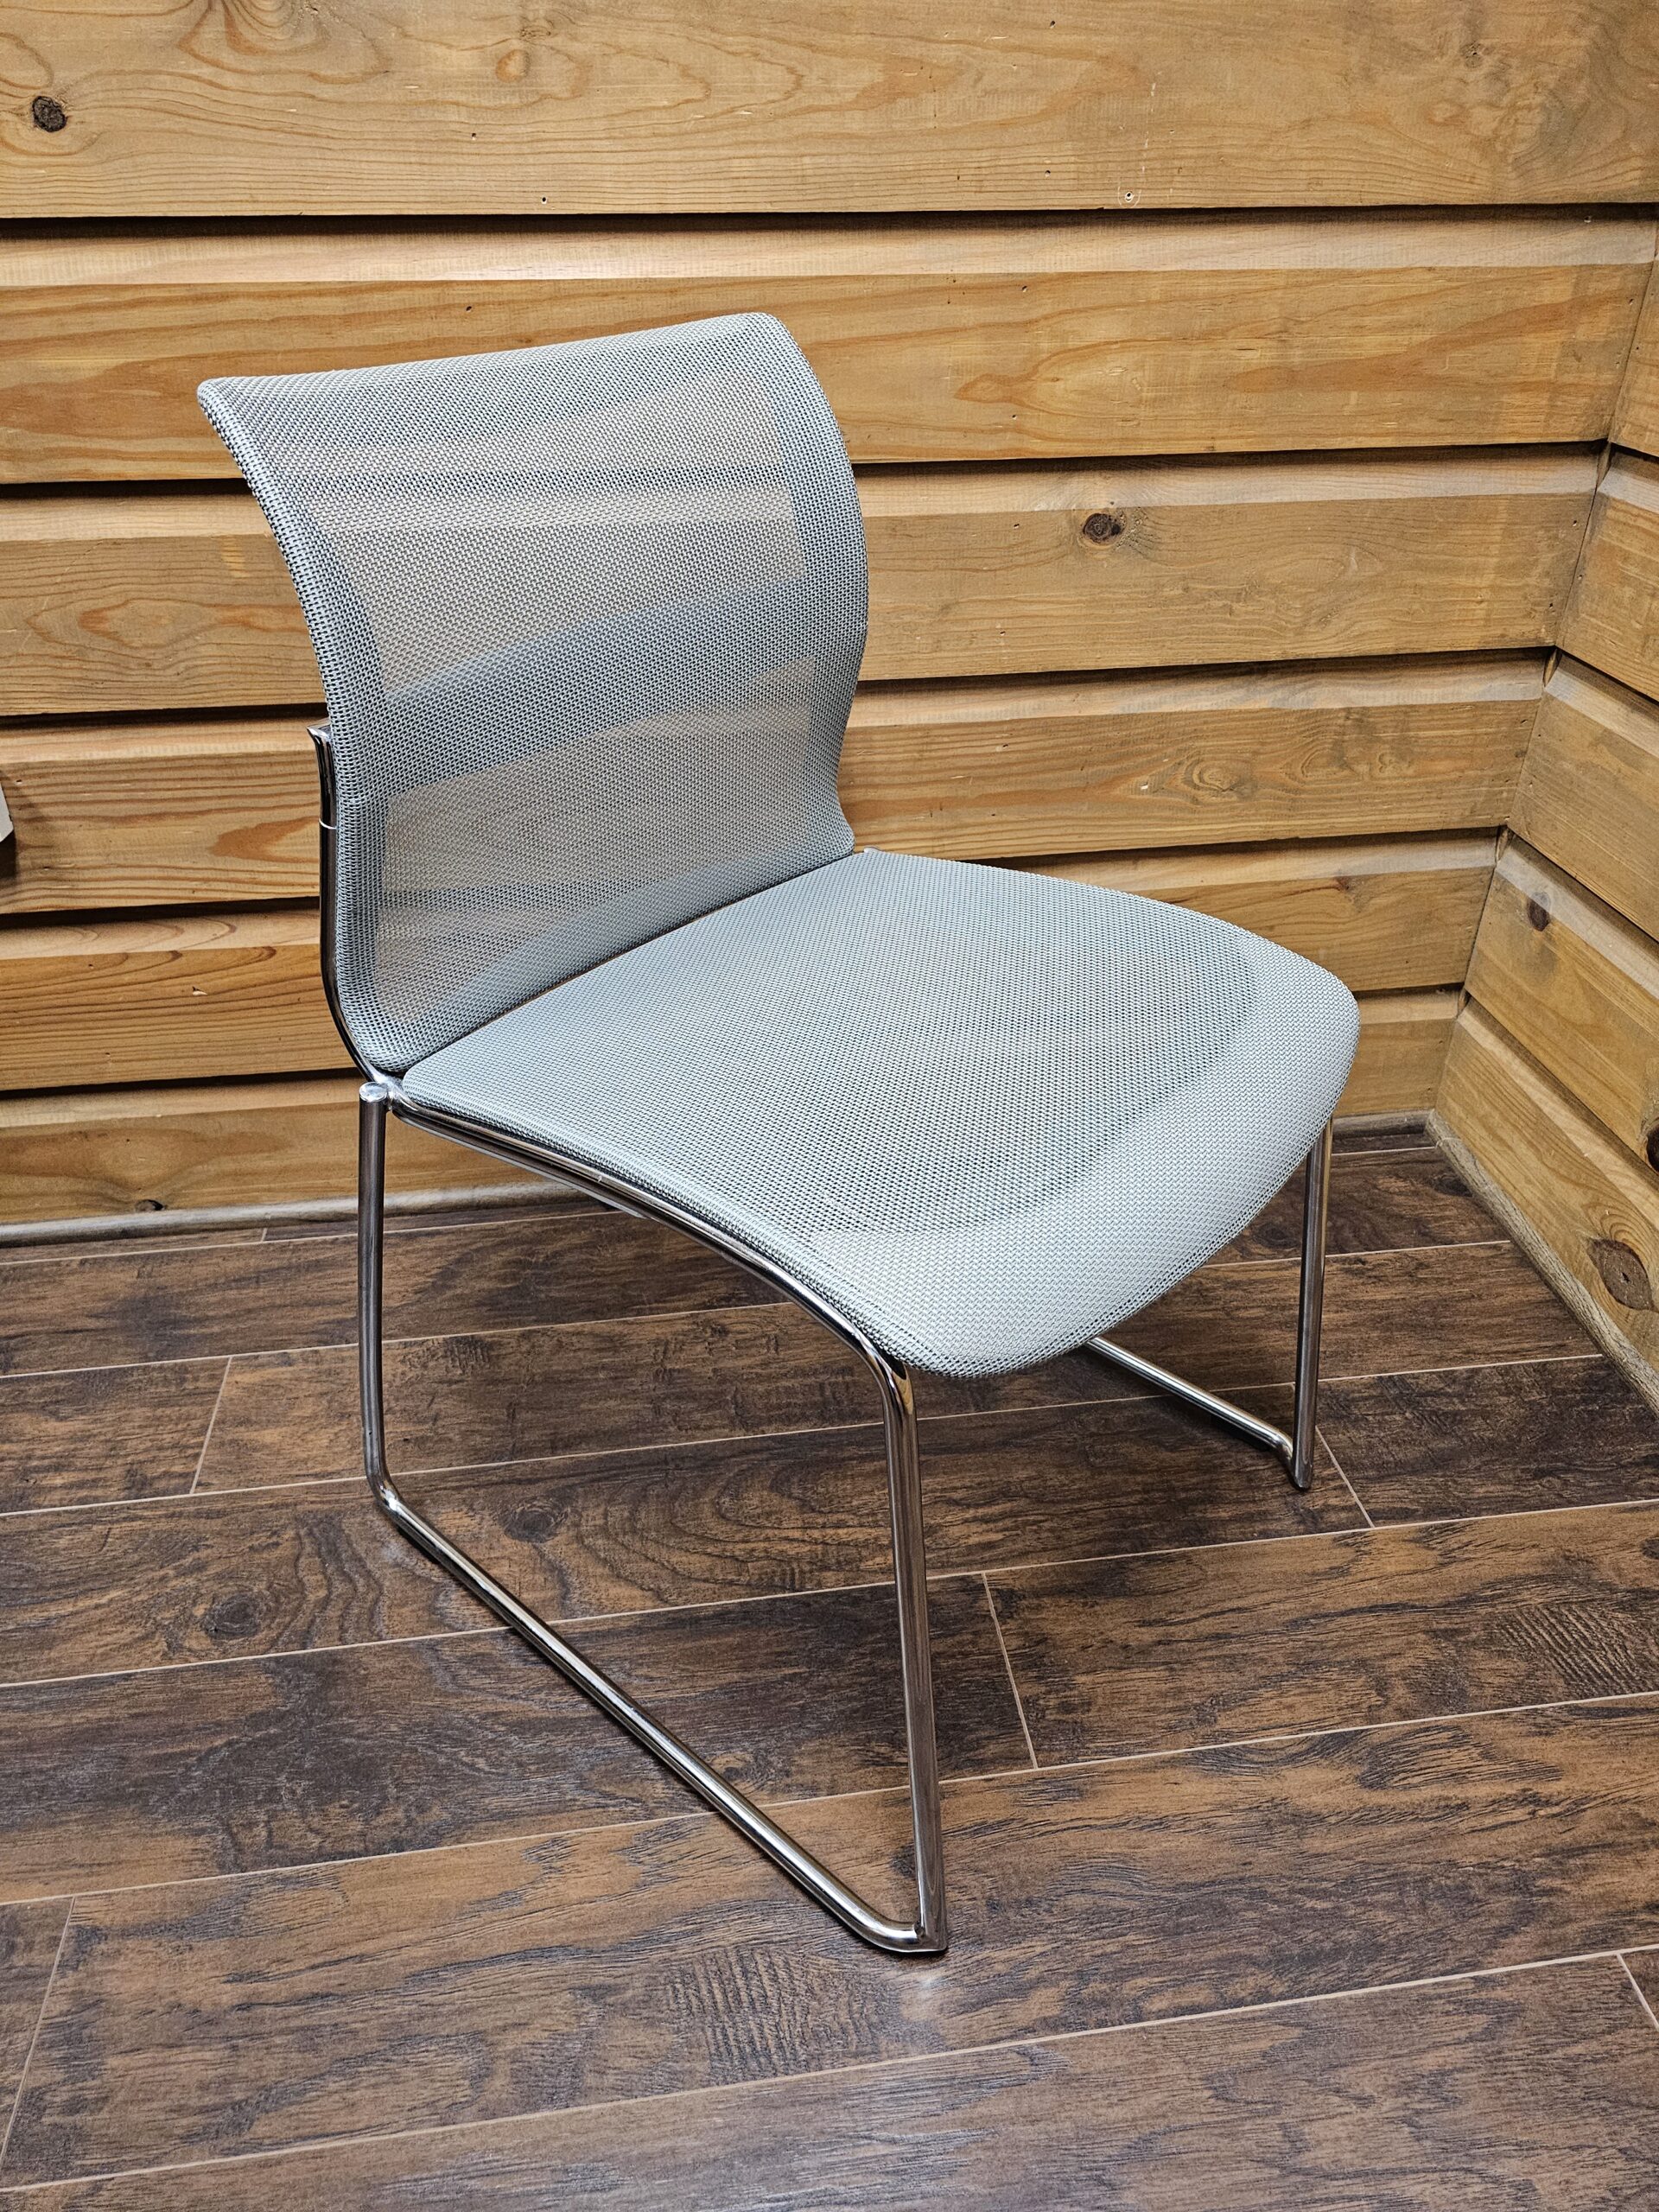 Stylex Zephyr Mesh Used Stack Chairs - Pack Of 4 - Smart Buy 